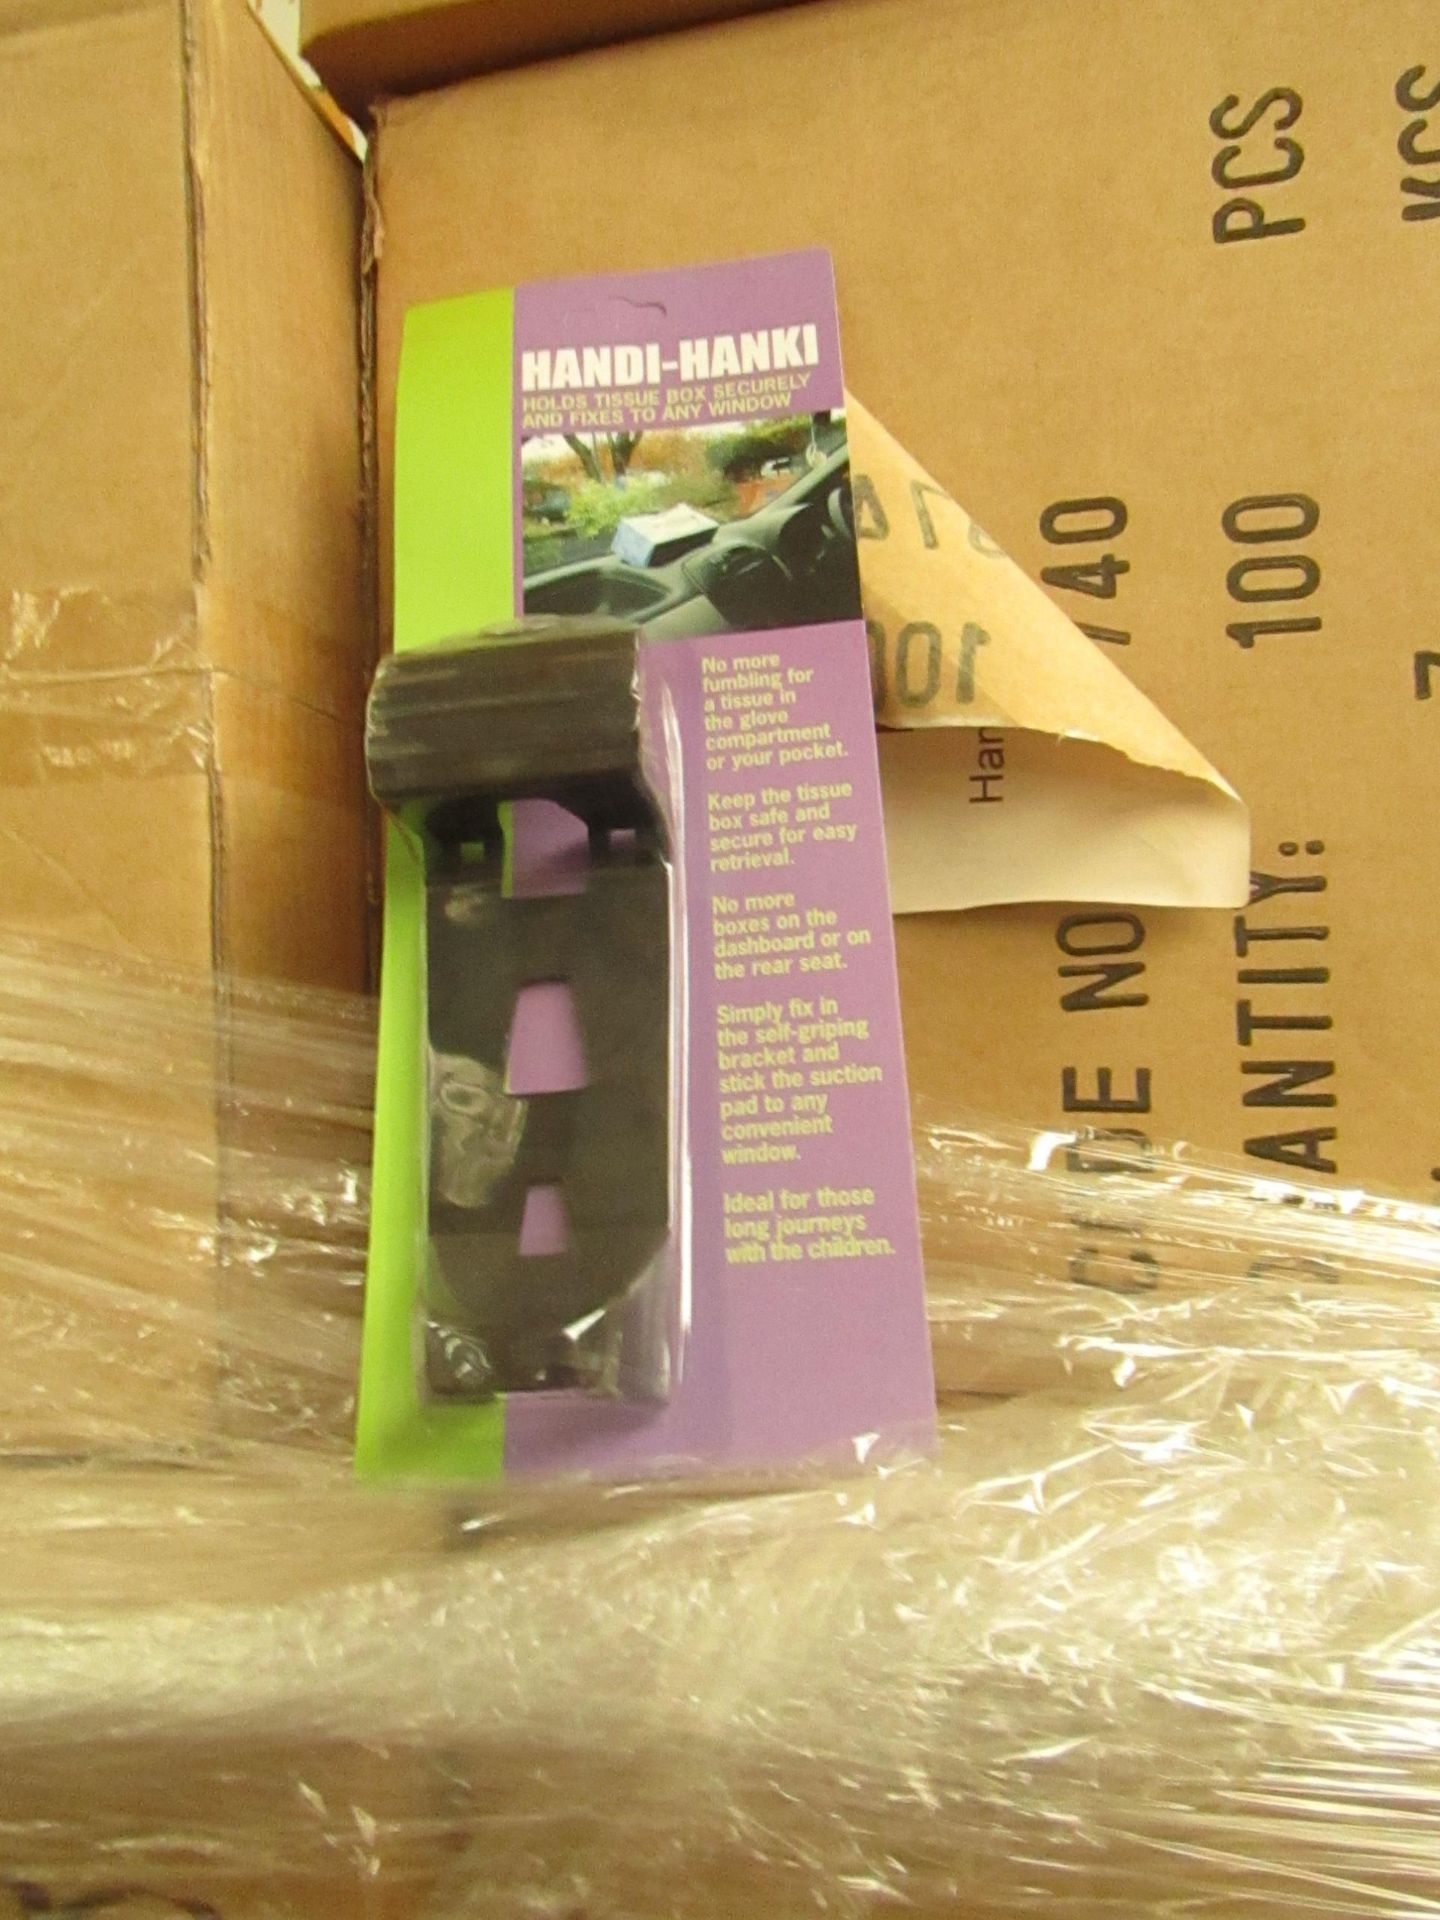 100x Handi-Hanki - Holds Tissue Box Securely & Fix to Any Window - Unused & Packaged.